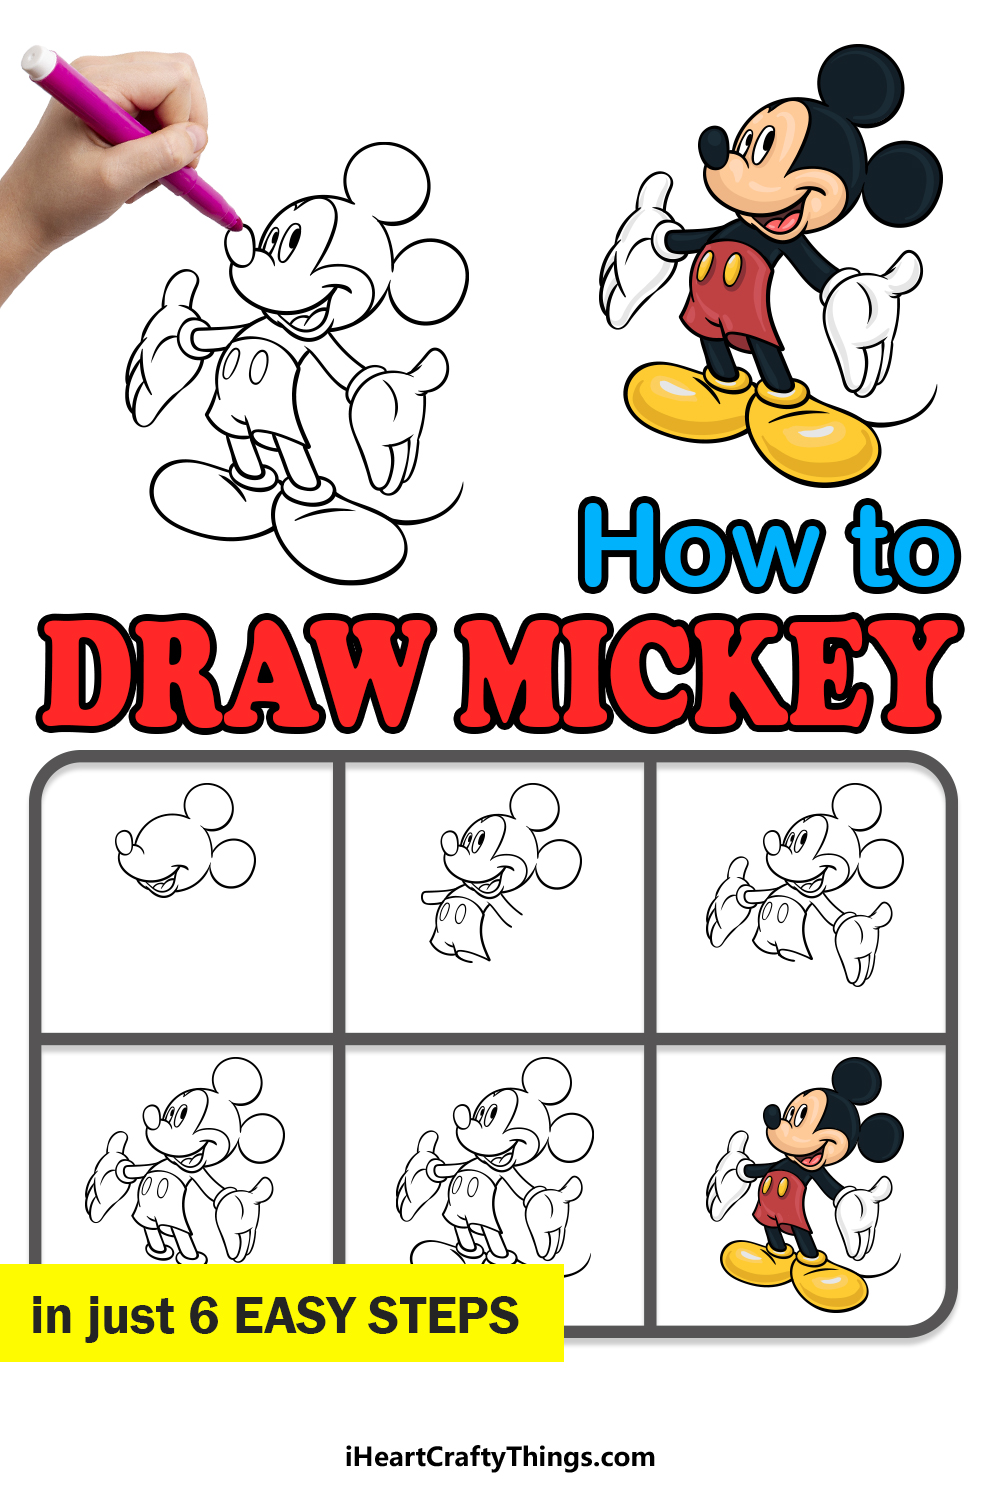 how to draw Mickey in 6 easy steps